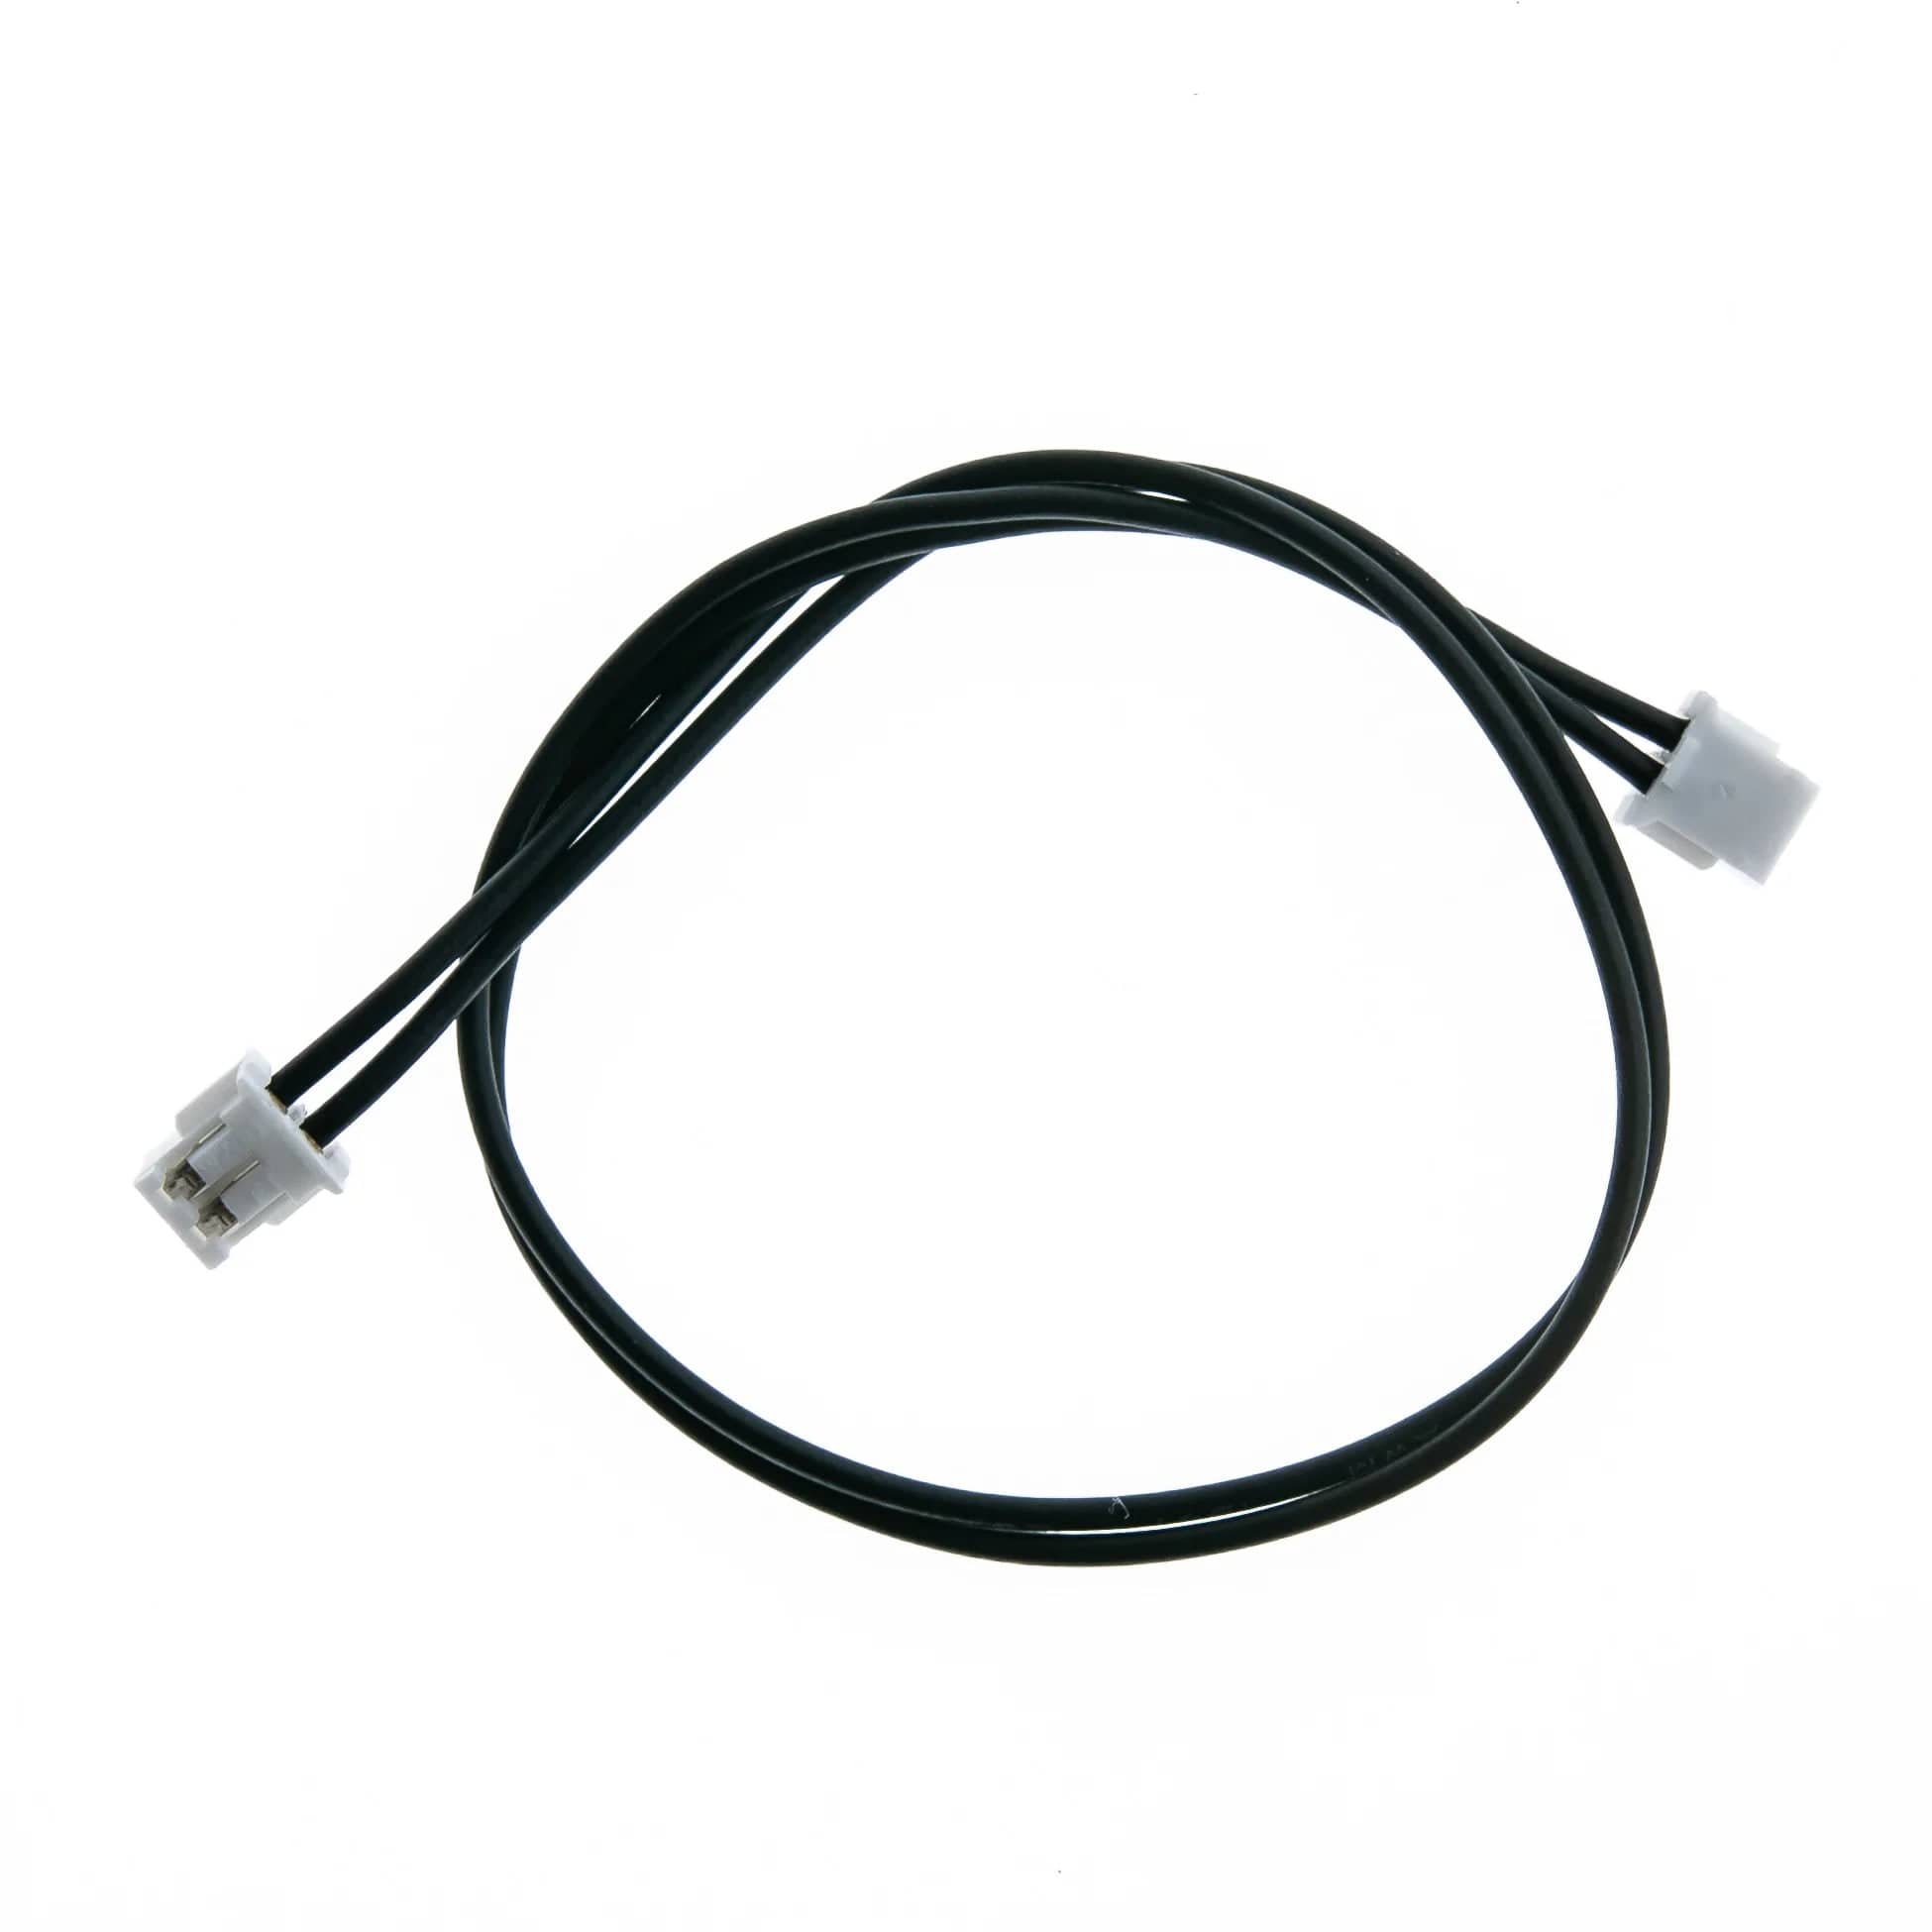 Motor Connector Shim Cable (pack of 2) - The Pi Hut